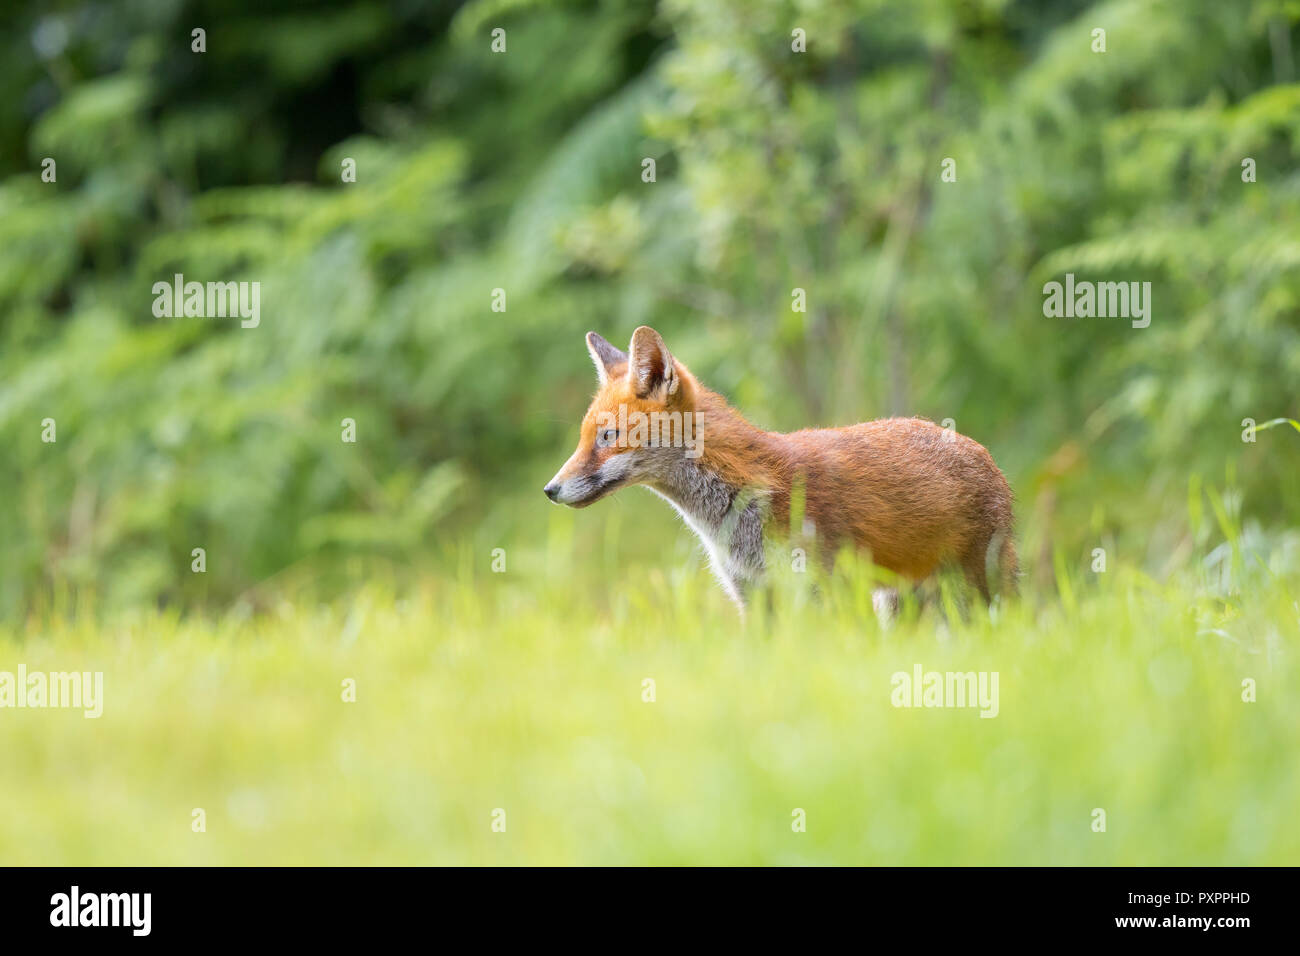 Close side view of young, wild, British red fox (Vulpes vulpes) standing isolated in long grass in outdoor natural UK countryside habitat. Stock Photo